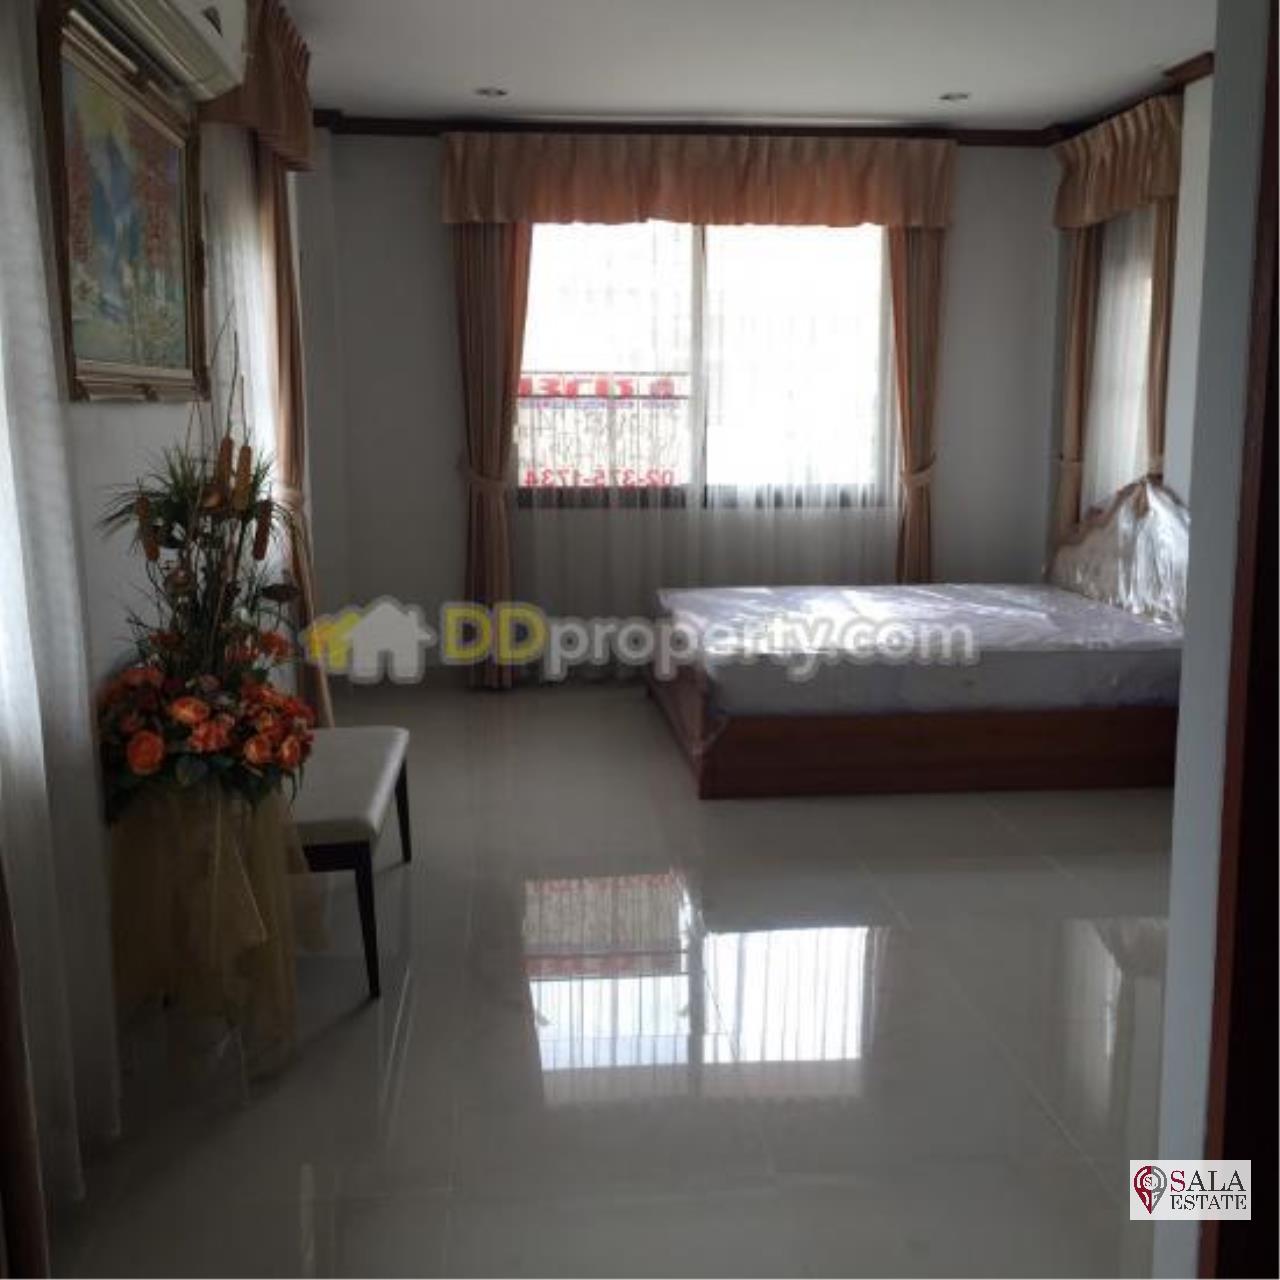 SALA ESTATE Agency's HOUSE FOR SALE - NEAR SUVARNABHUM AIRPORT AND BANG NA -TRAT RD. 11